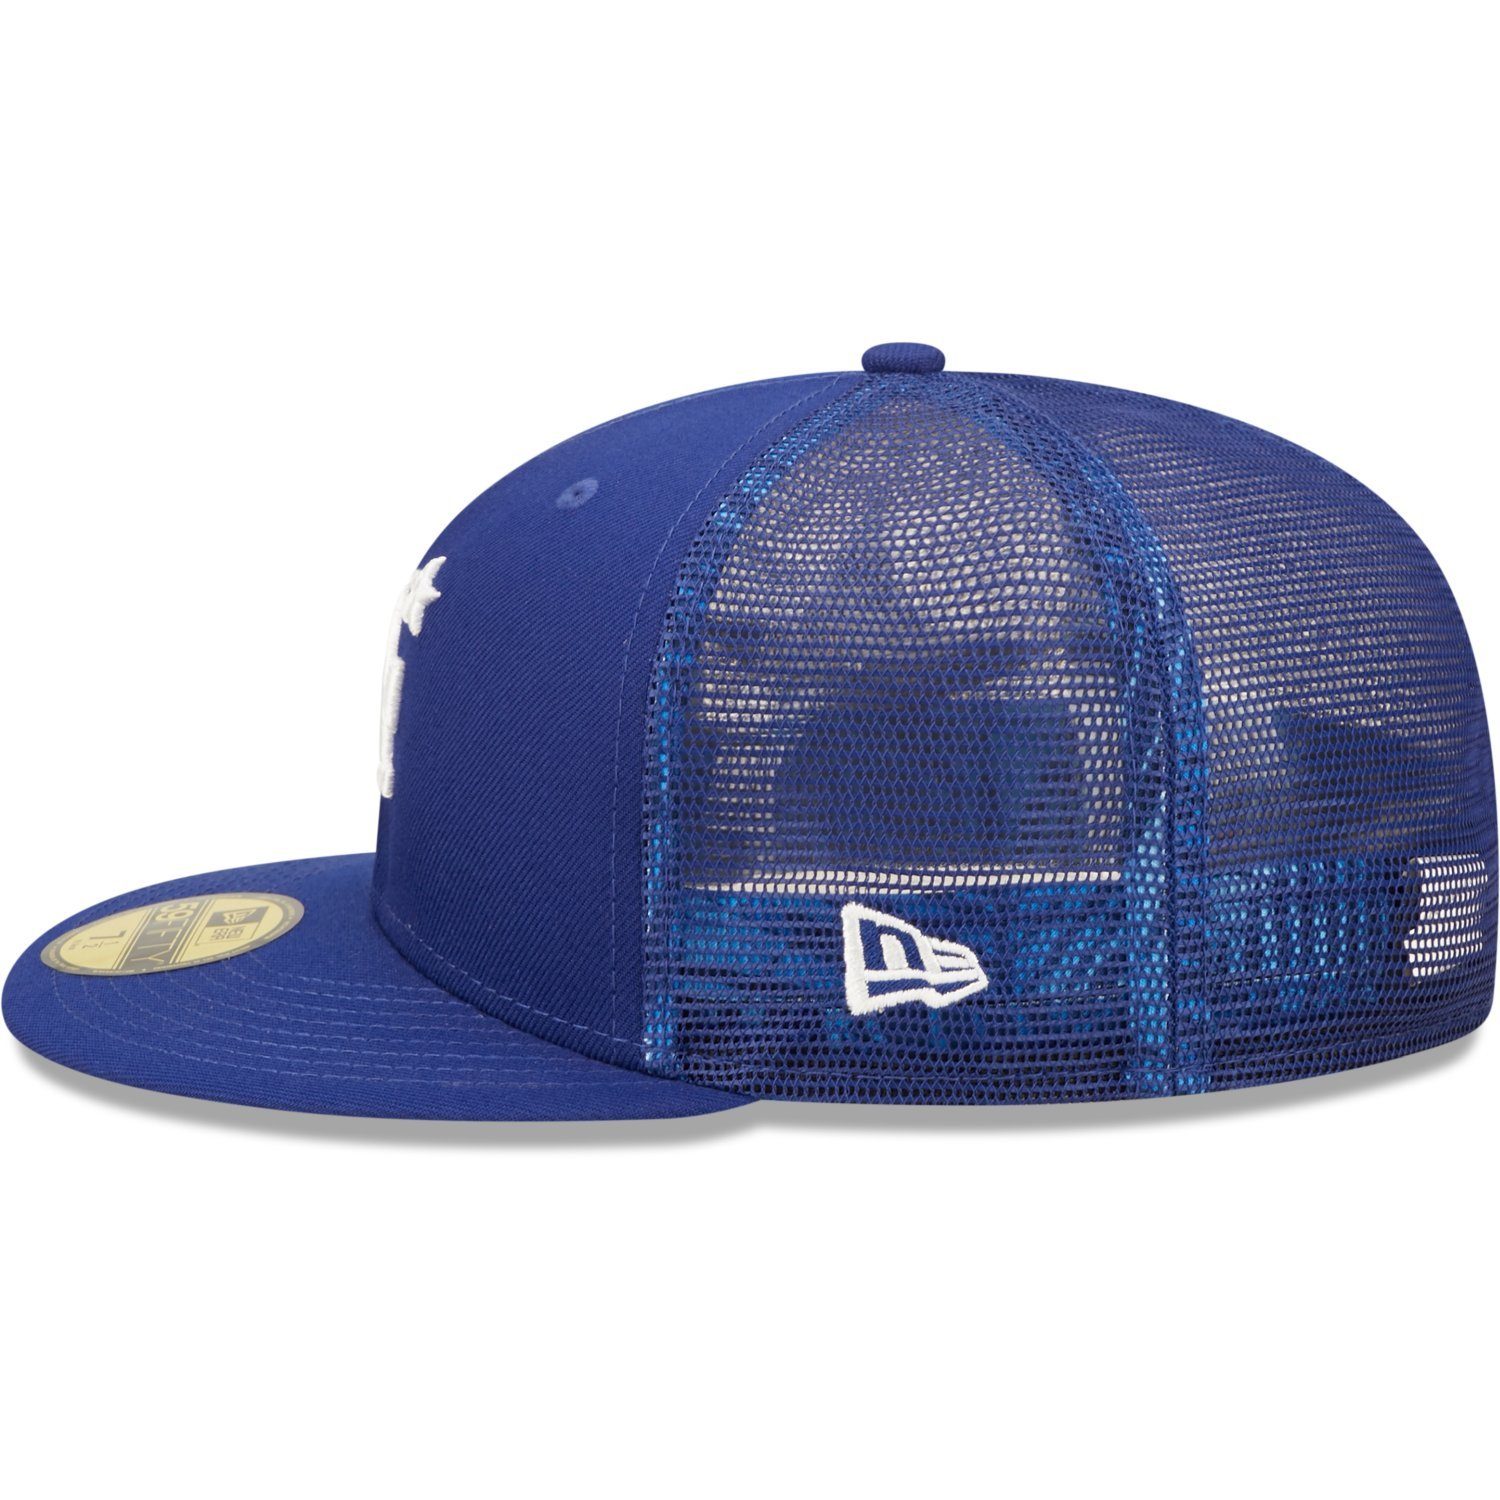 59Fifty Angeles Cap Dodgers Era ALLSTAR New Fitted GAME Los